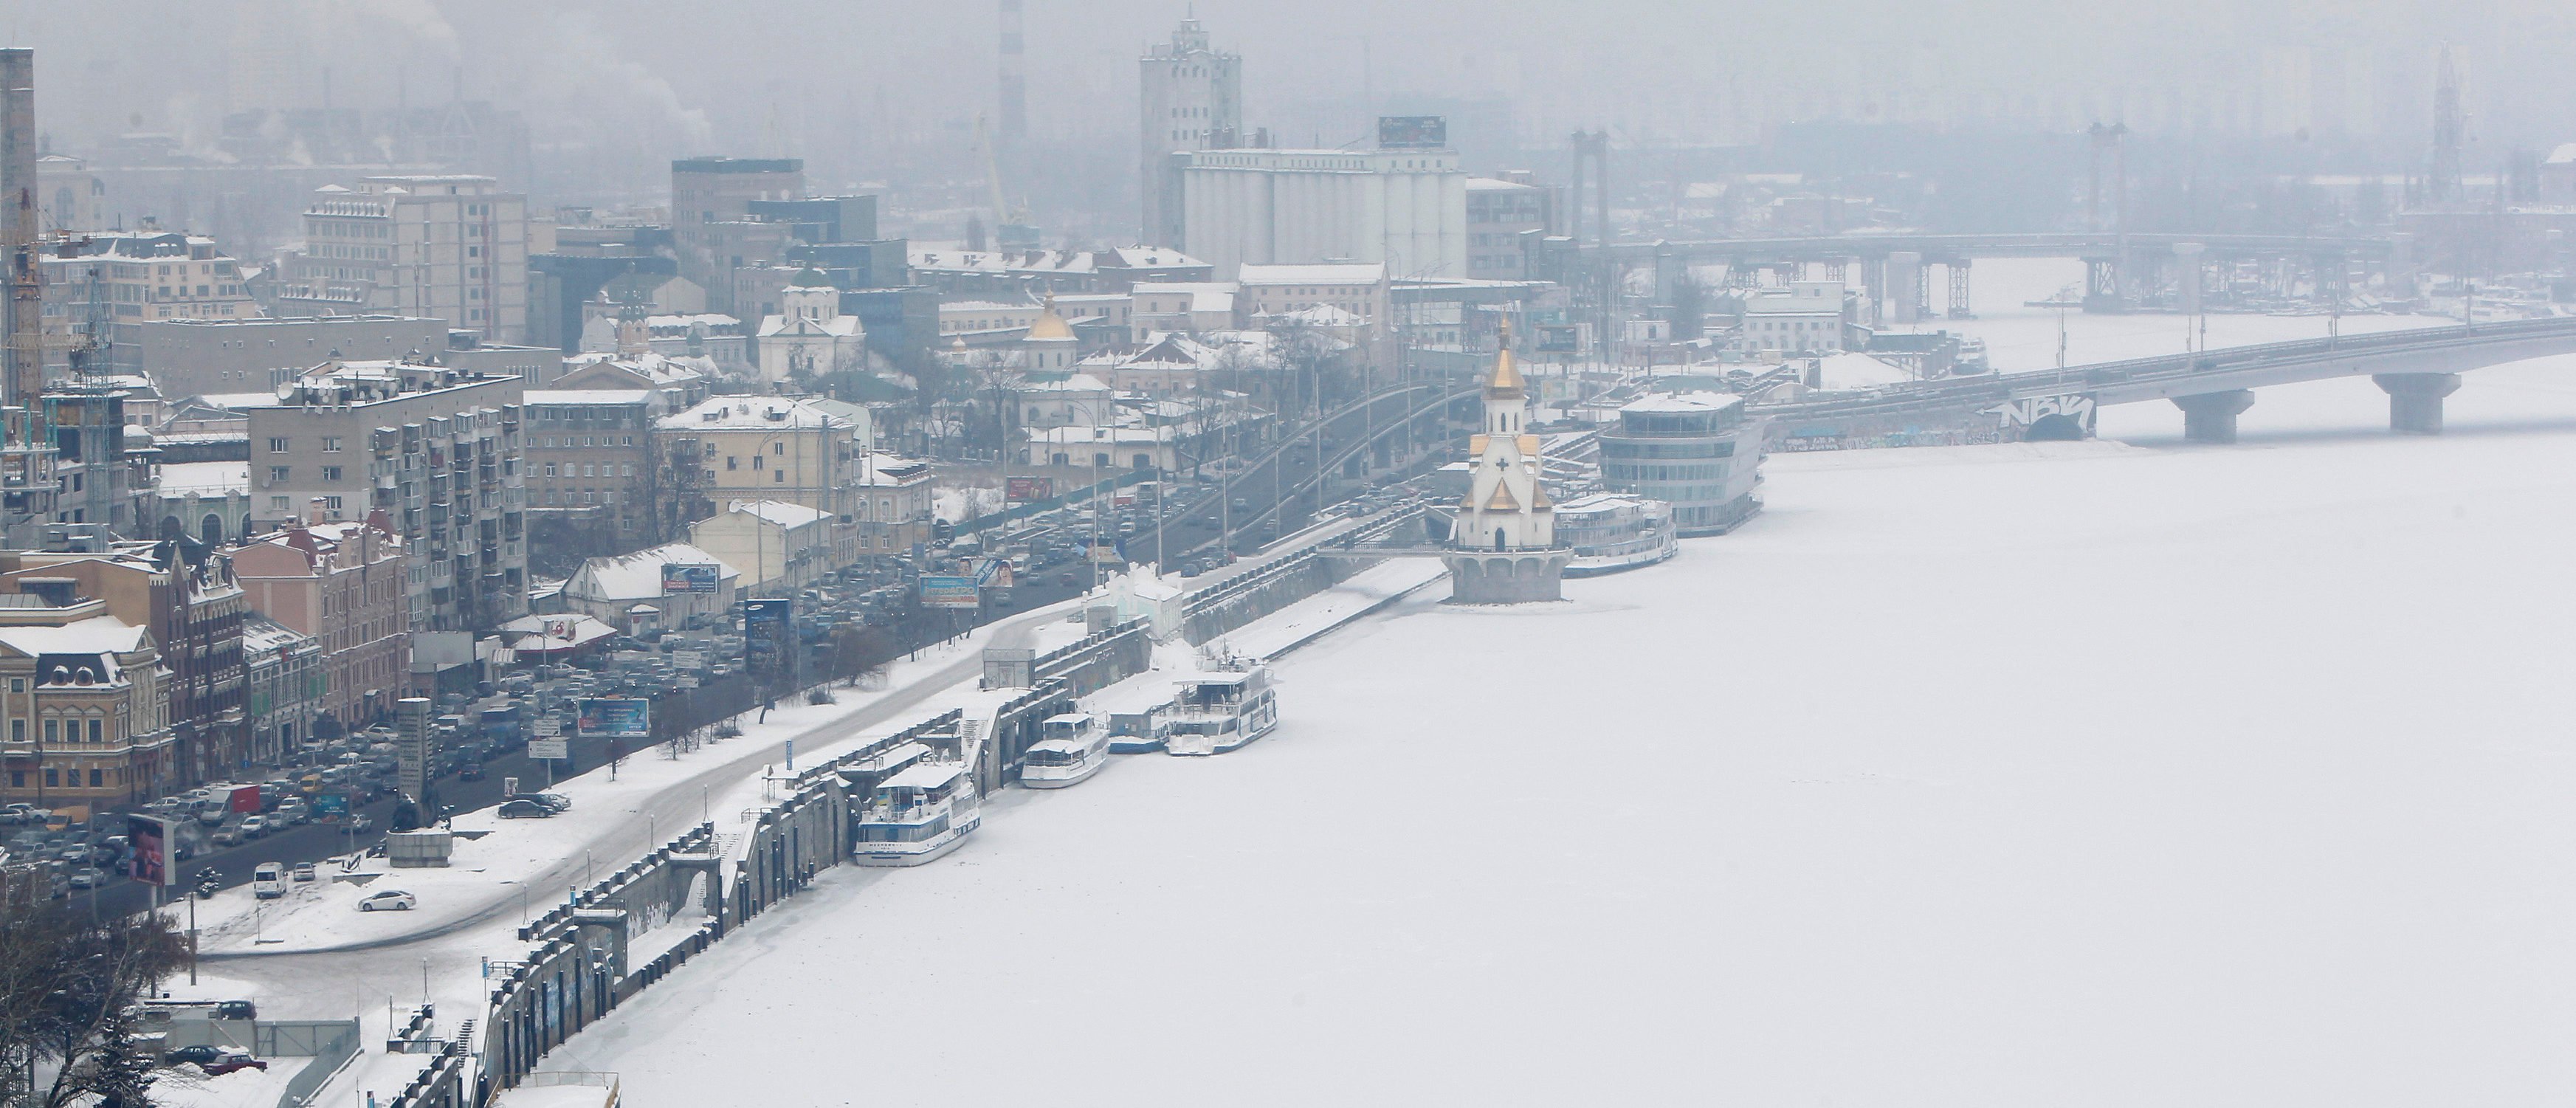 A view of the frozen River Dnieper in an air temperature around minus 18 degree Celsius (minus 4 Fahrenheit) in snow covered central Kiev, February 3, 2012.  Thirty-eight more deaths from a cold snap have been registered in Ukraine in the past 24 hours, bringing to 101 the toll from freezing temperatures across the former Soviet republic, the Emergencies Ministry said on Friday.  REUTERS/Gleb Garanich 